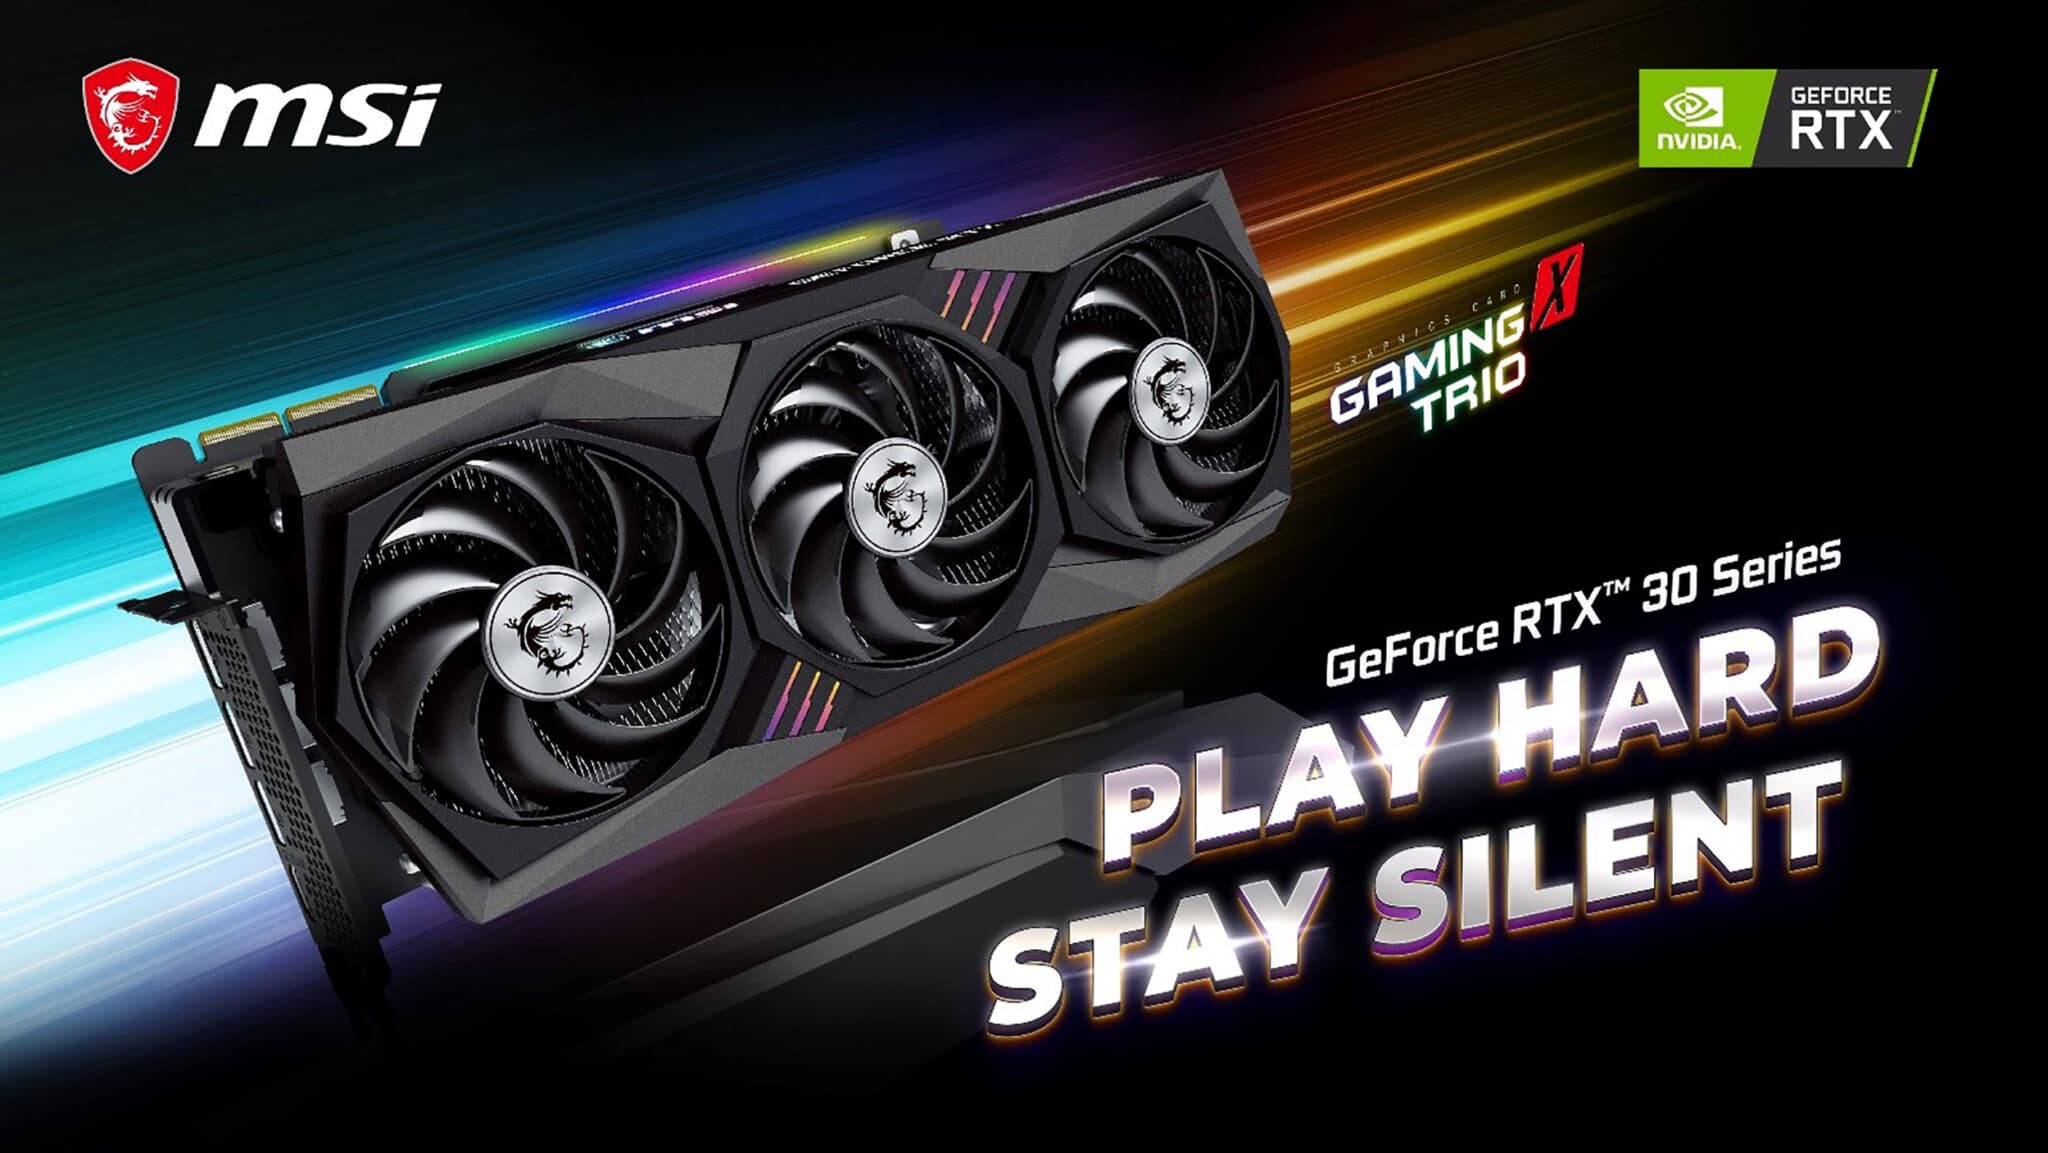 MSI GeForce RTX 3080 Gaming X Trio Outshines Founders Edition